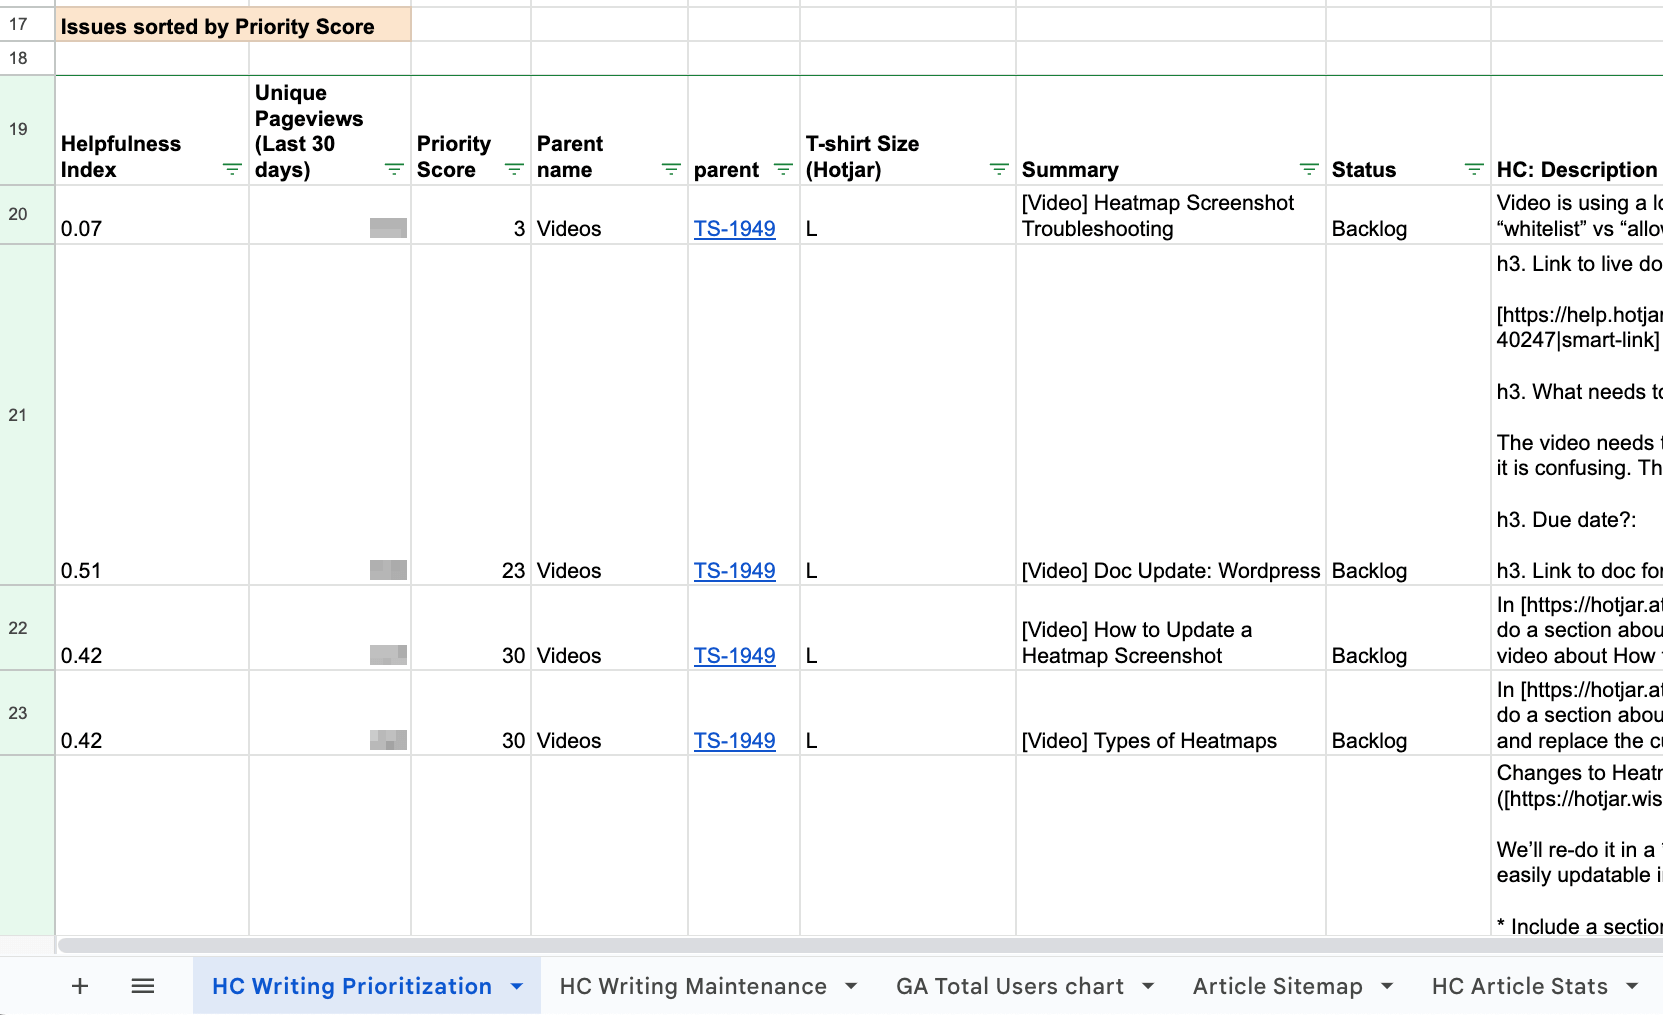 Google Sheet showing a sorted table of Jira issues based on priority score to assist with assigning the next most important Customer Education content update.